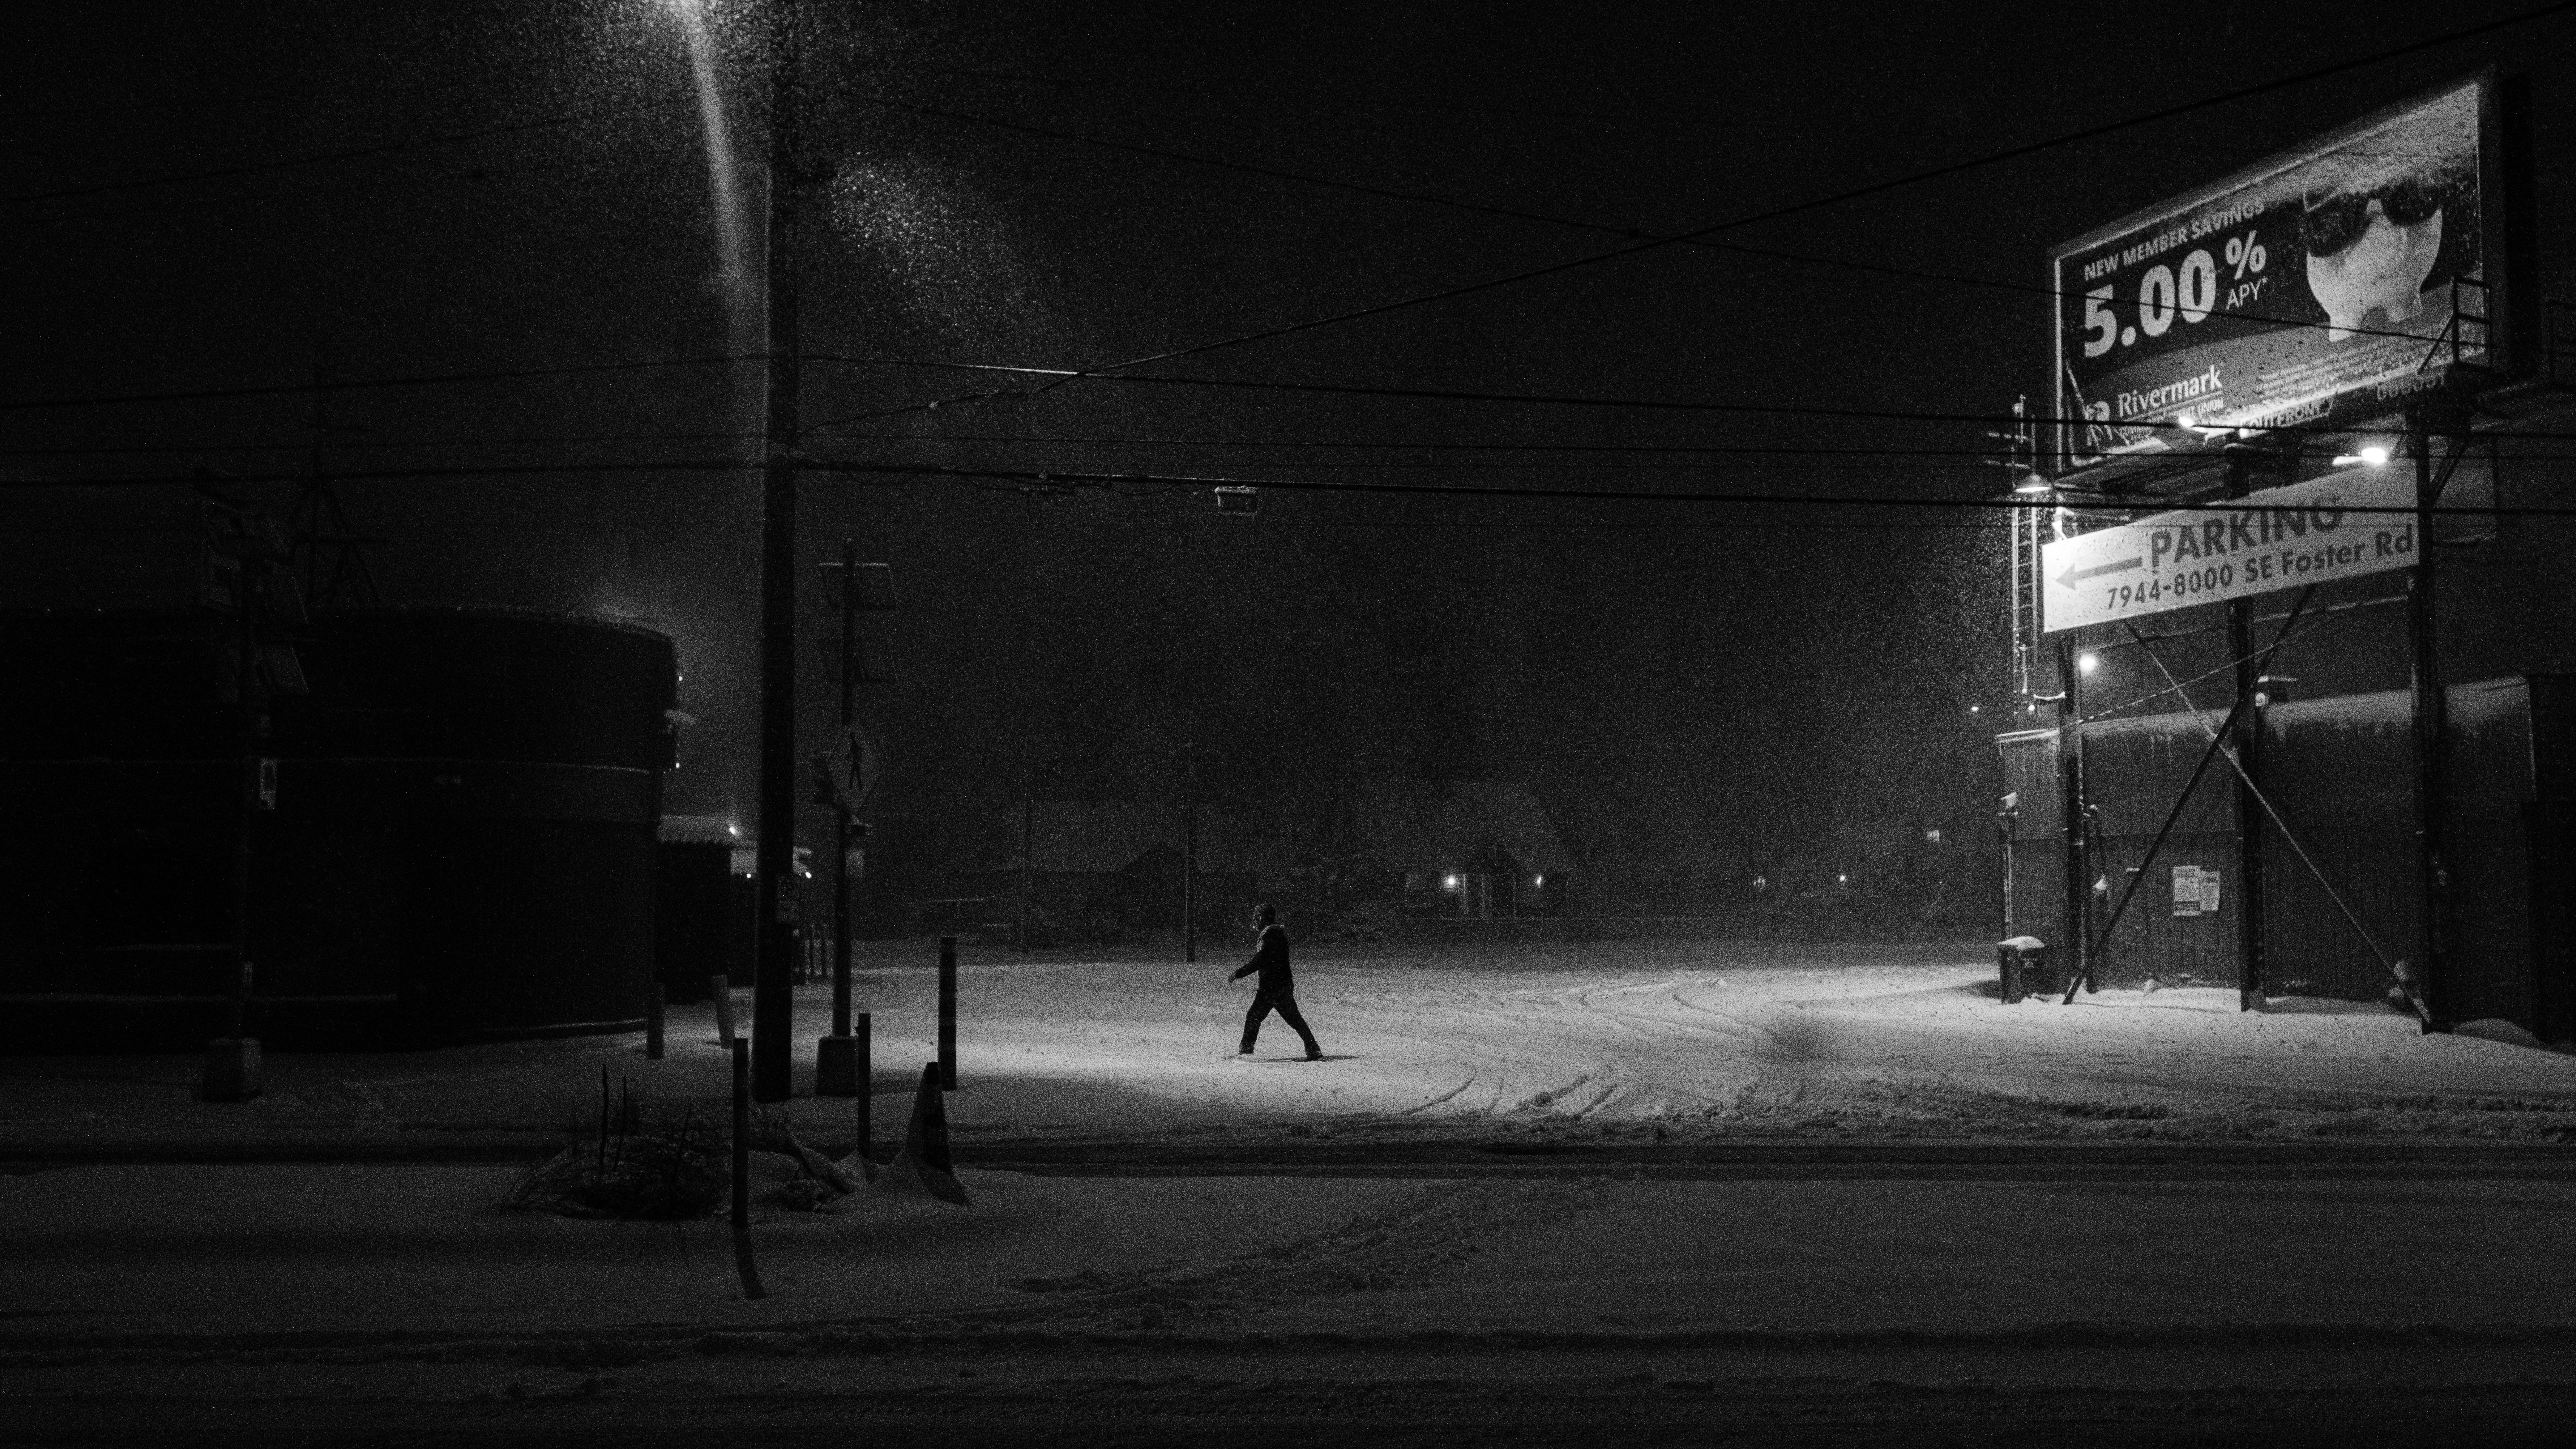 Monochrome. Two people cross a street at night during a snowstorm.